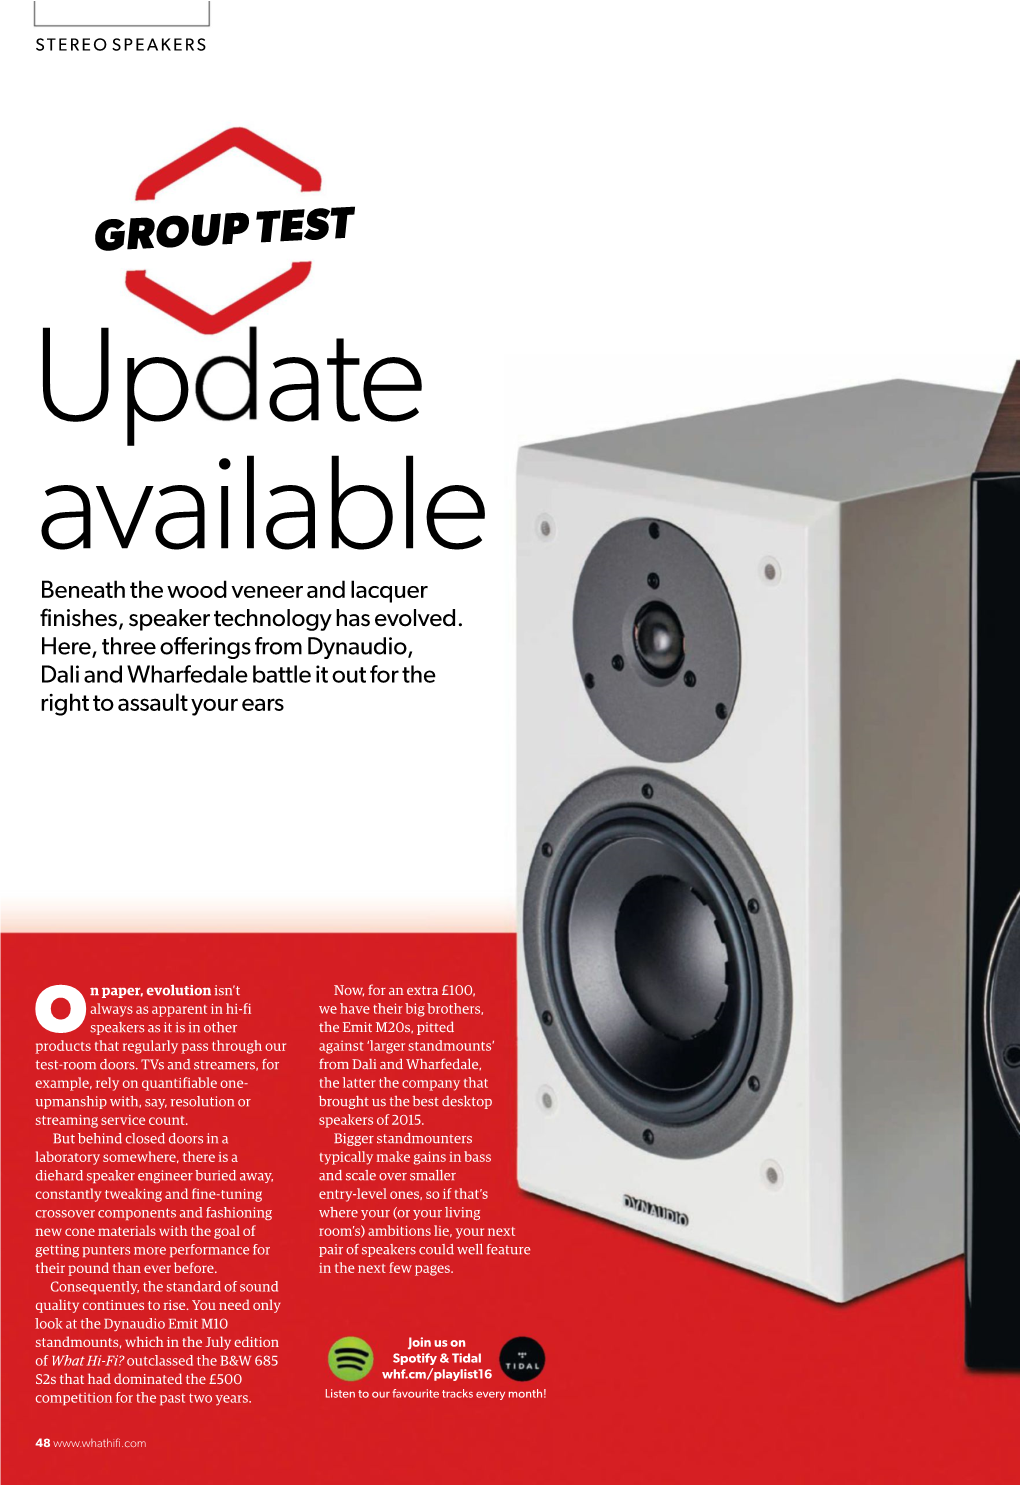 GROUP TEST up Date Available Beneath the Wood Veneer and Lacquer Finishes, Speaker Technology Has Evolved